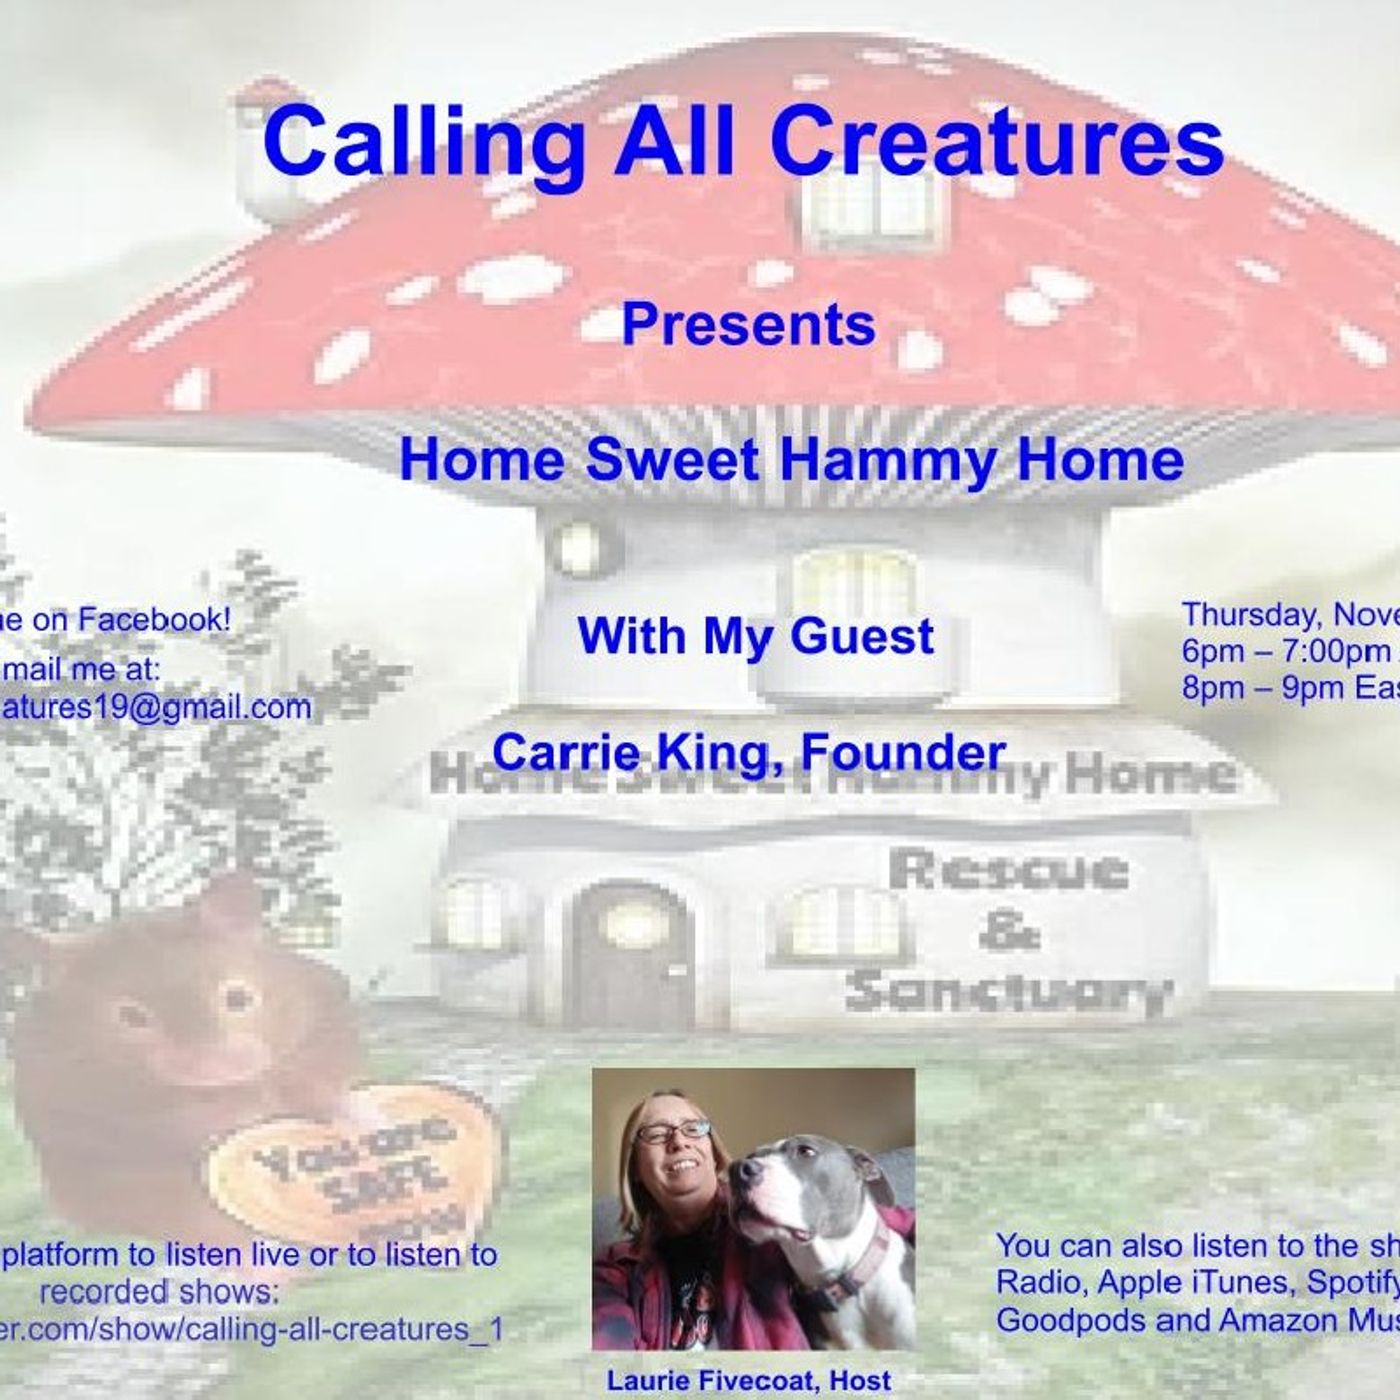 Calling All Creatures Presents Home Sweet Hammy Home